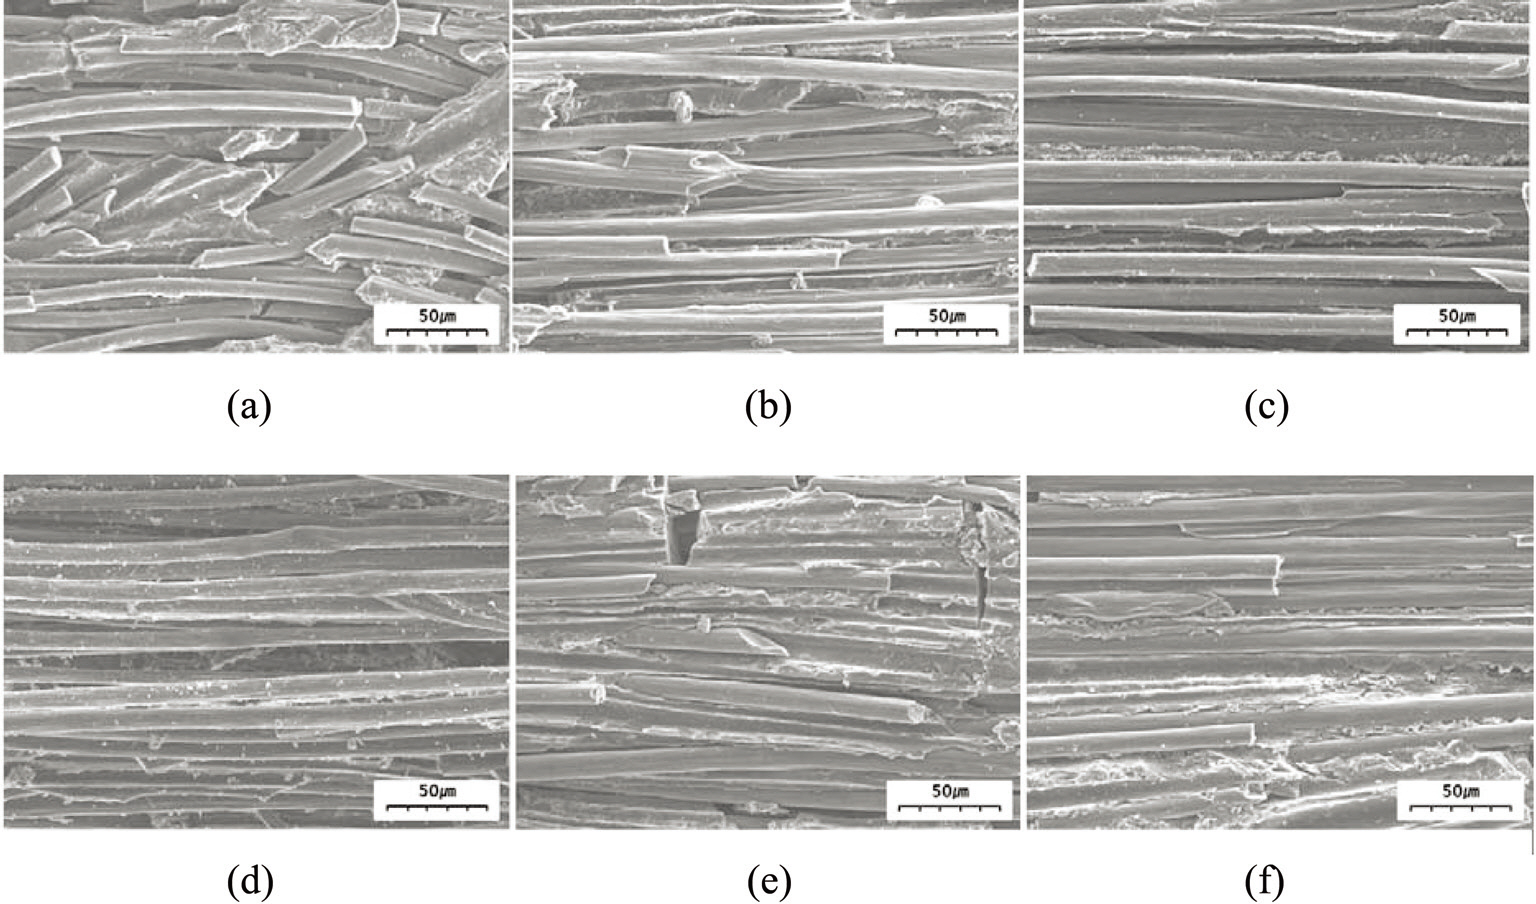 Microstructures of the composites prepared at different heat-treatment temperatures: (a) 1000℃ with 0% illite (b) 1650℃ with 0% illite (c) 2300℃ with 0% illite (d) 1000℃ with 10% illite (e) 1650℃ with 10% illite and (f ) 2300℃ with 10% illite.